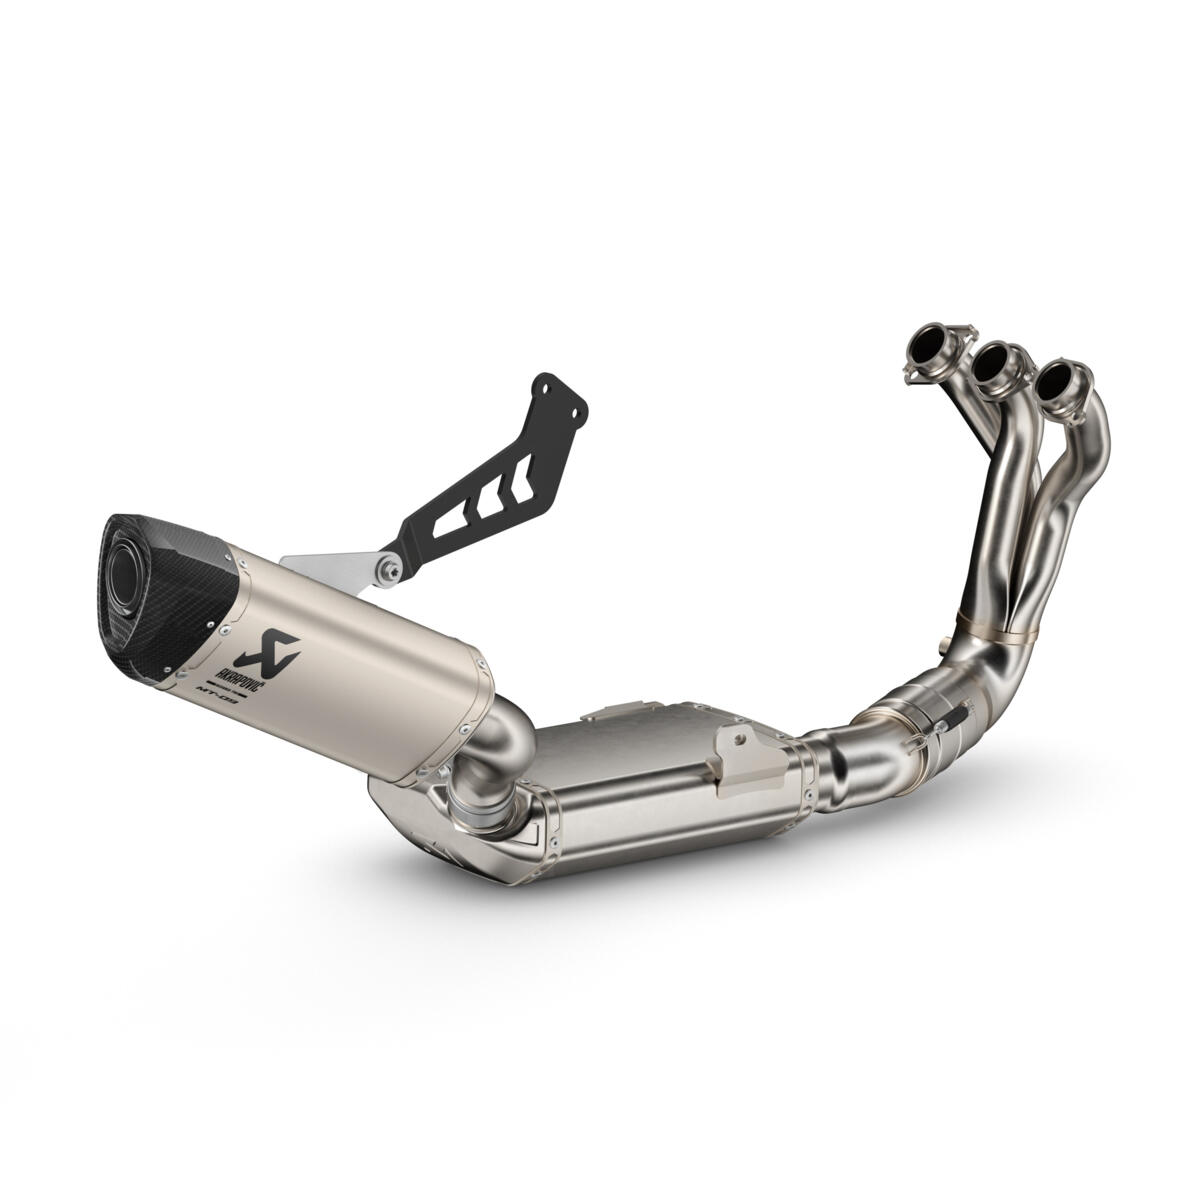 Make your Yamaha look even cooler with the full exhaust system, especially engineered by Akrapovič for Yamaha MT-09!